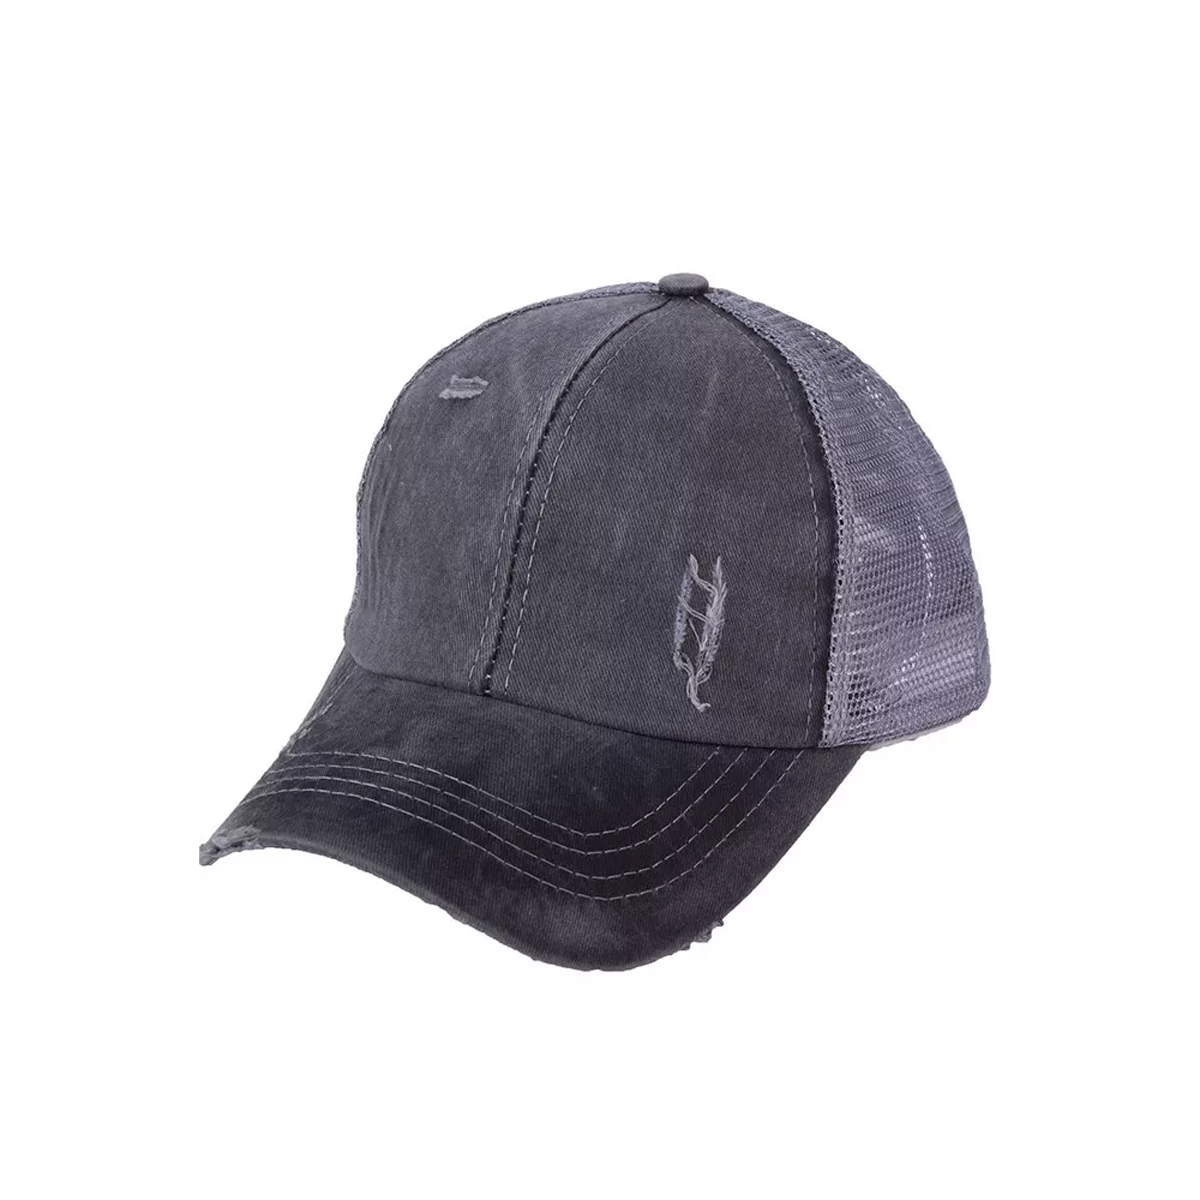 Dark Grey Distressed Hat - Southern Grace Creations